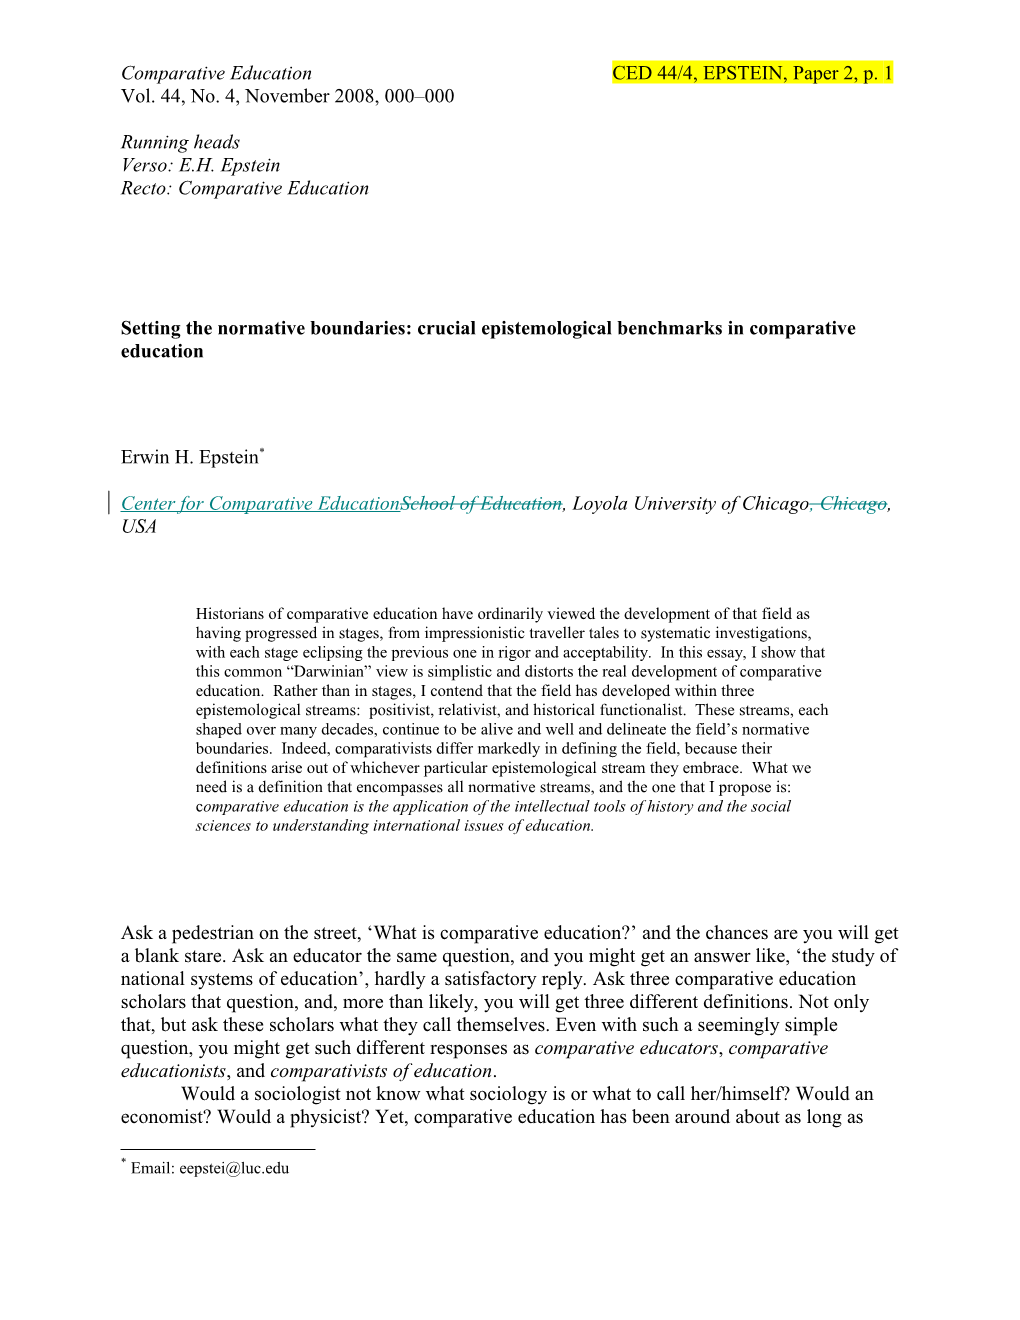 Setting the Normative Boundaries: Crucial Epistemological Benchmarks in Comparative Education